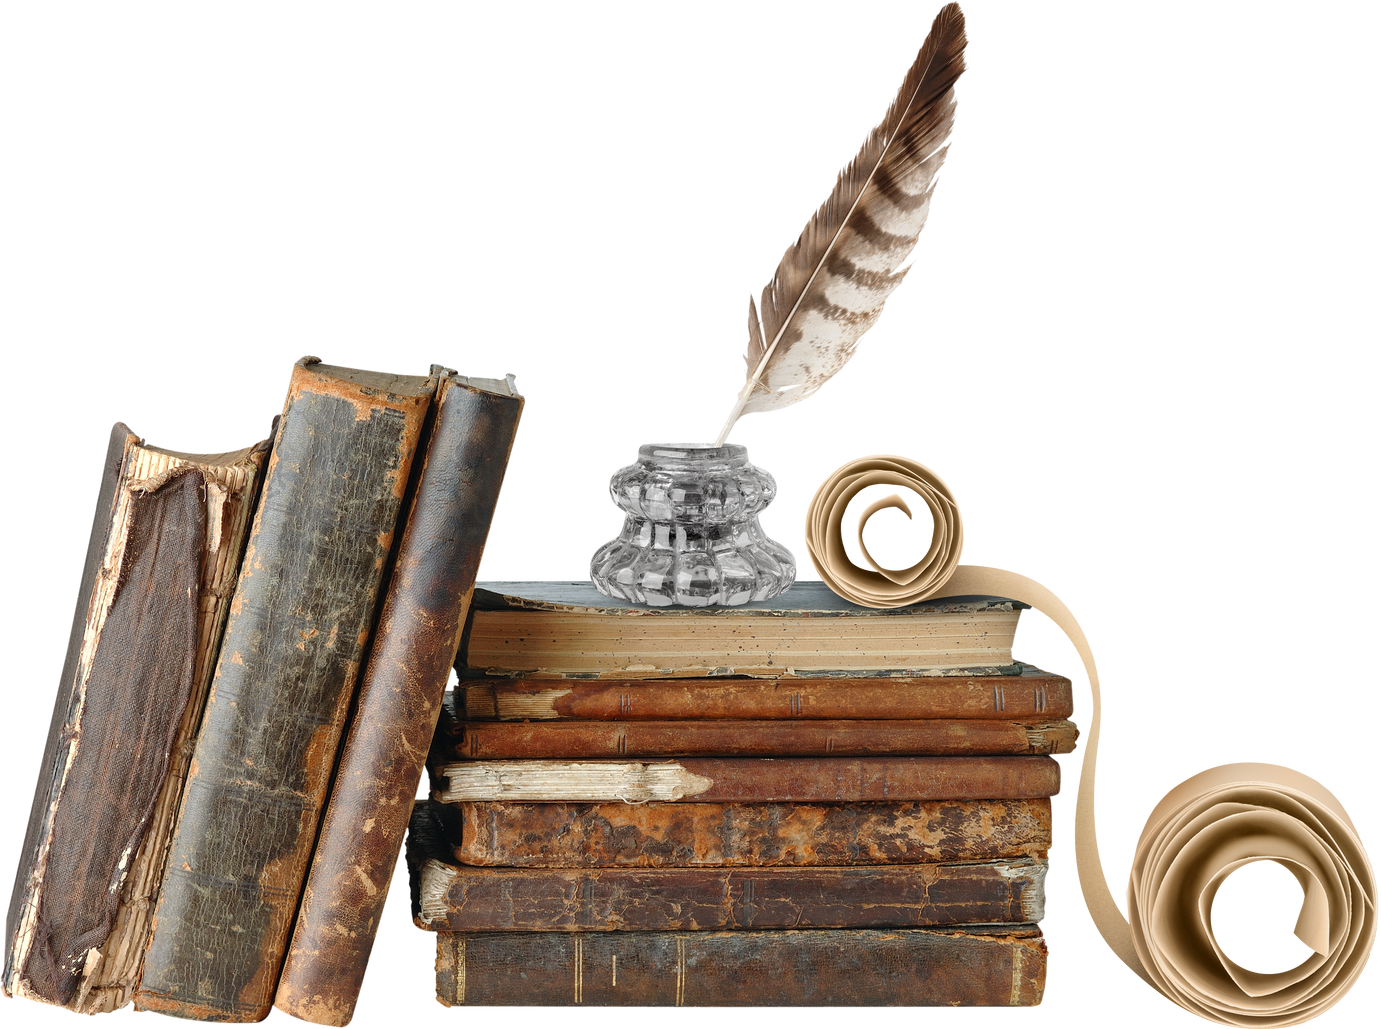 Old Books and Scrolls